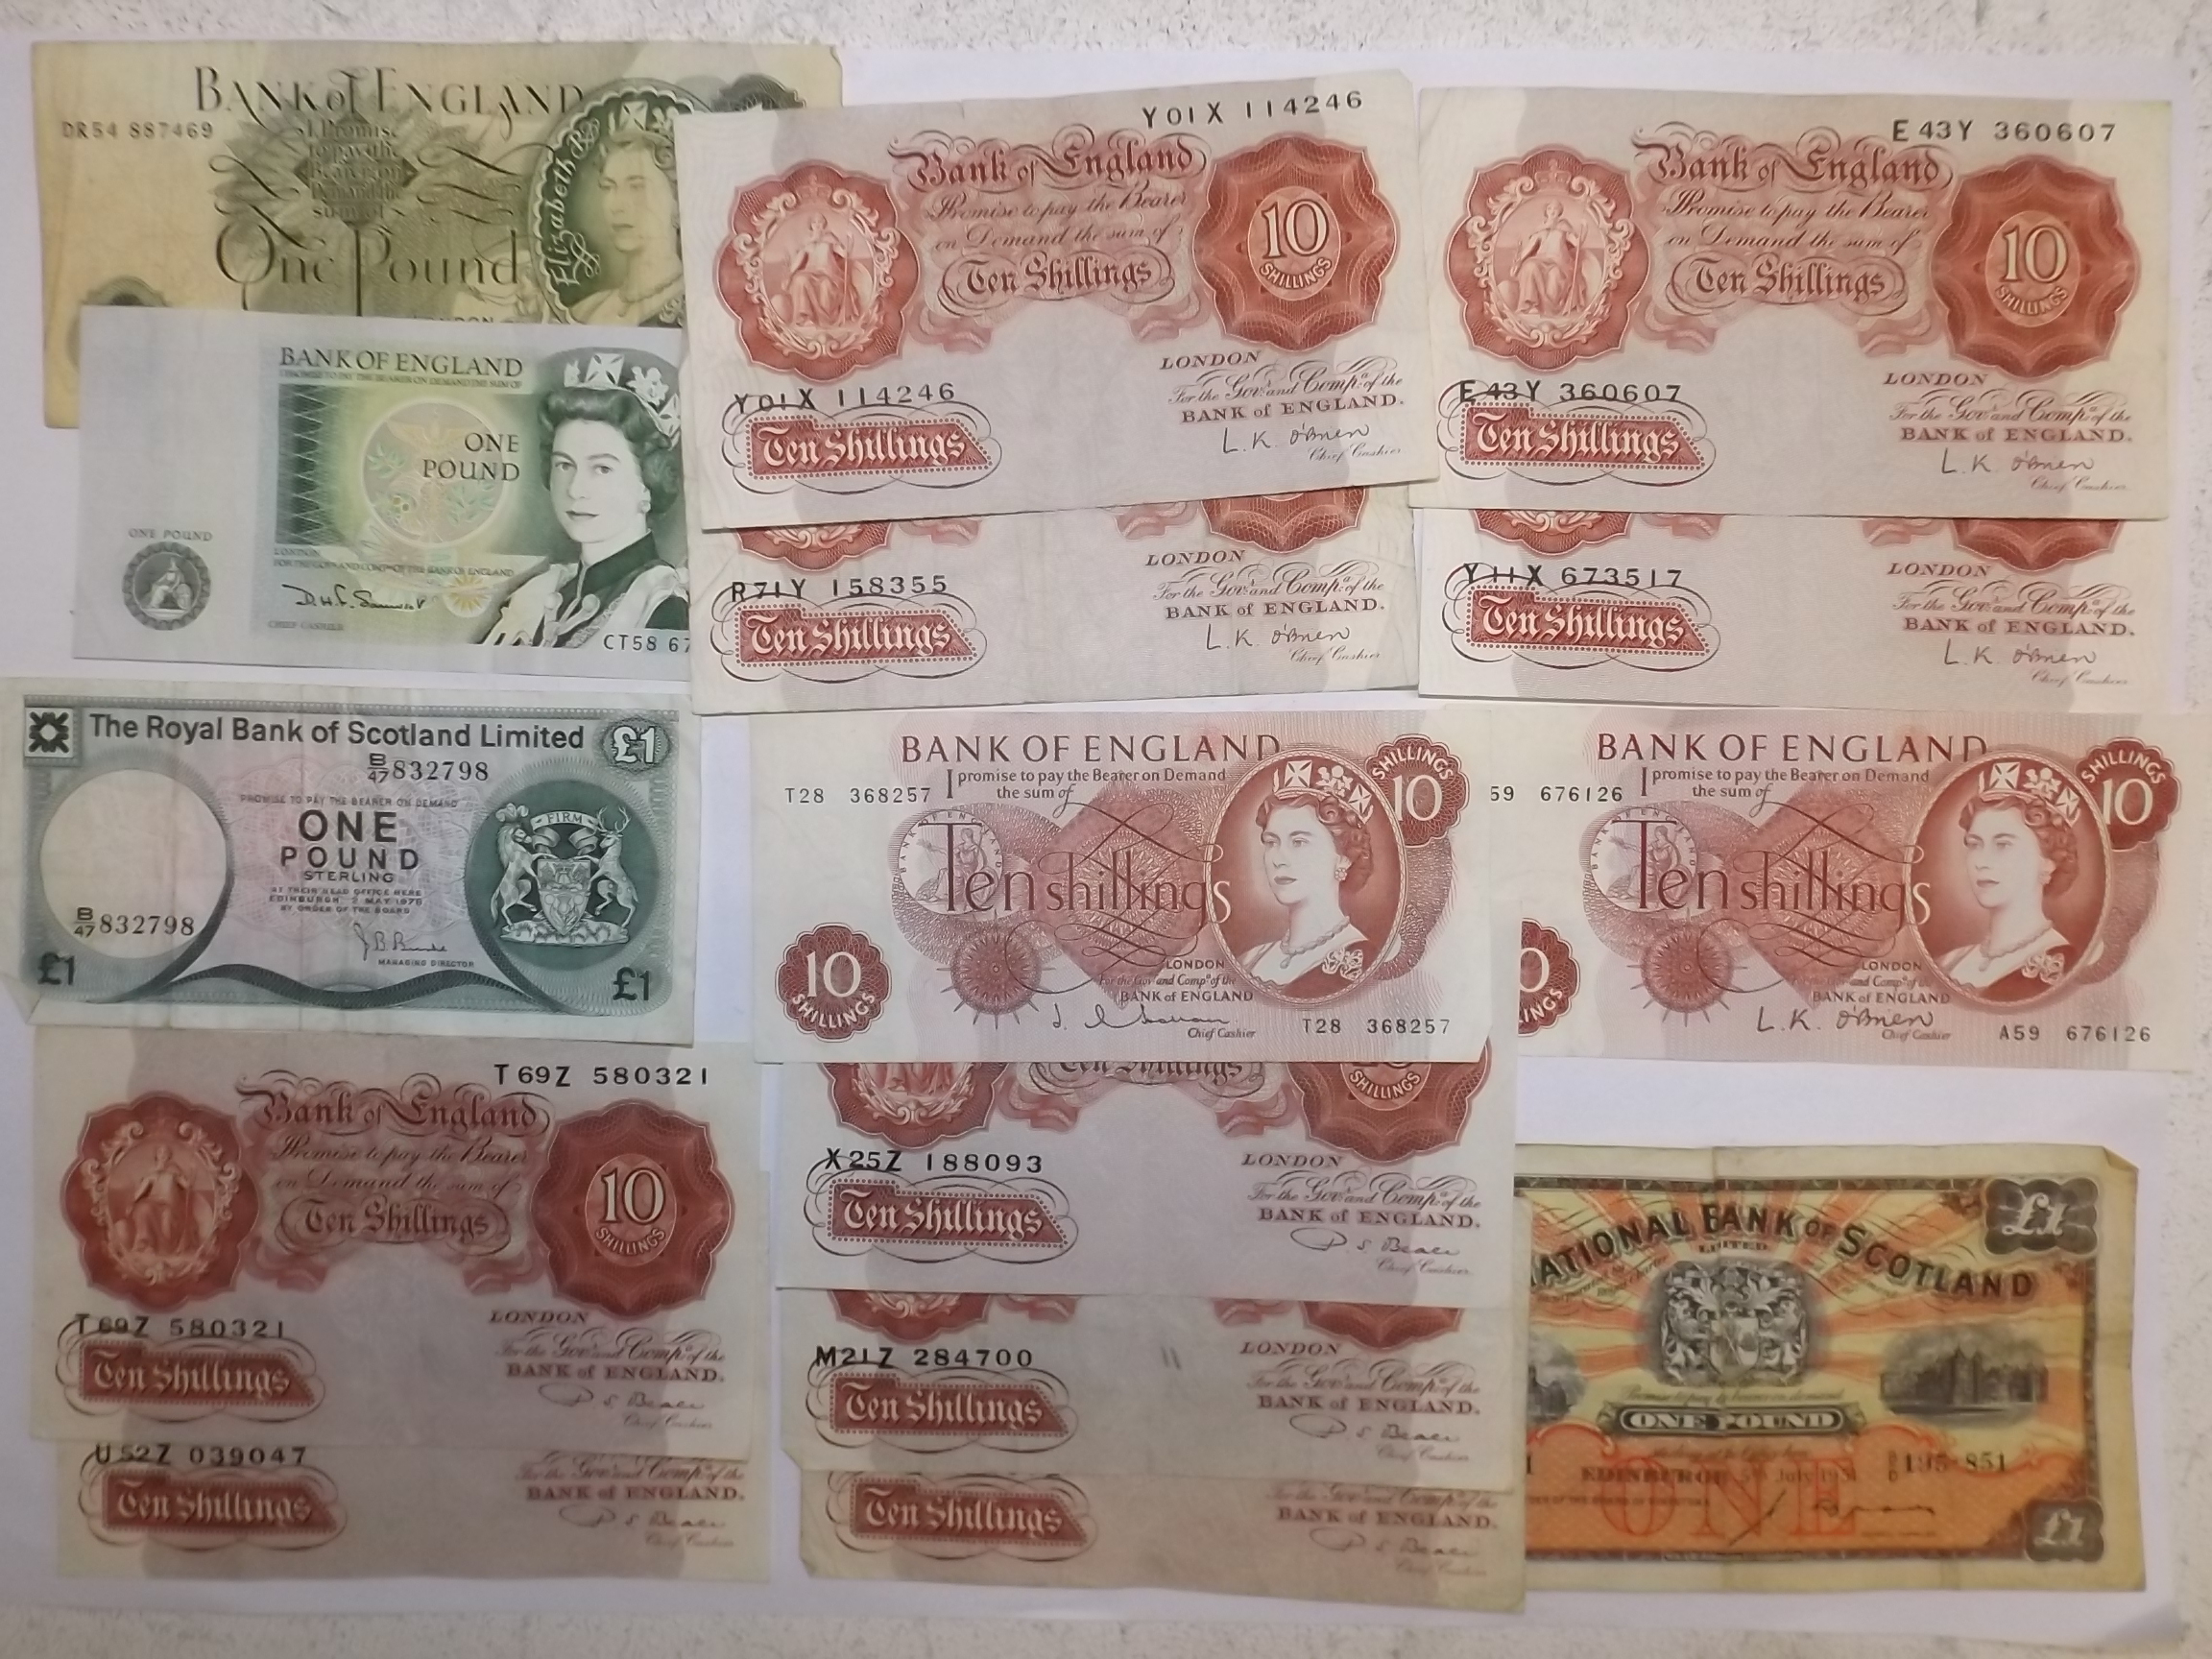 Banknotes:- 11 x 10/- 2x £1 together with Bank of Scotland 2x £1 including 5th July 1951.